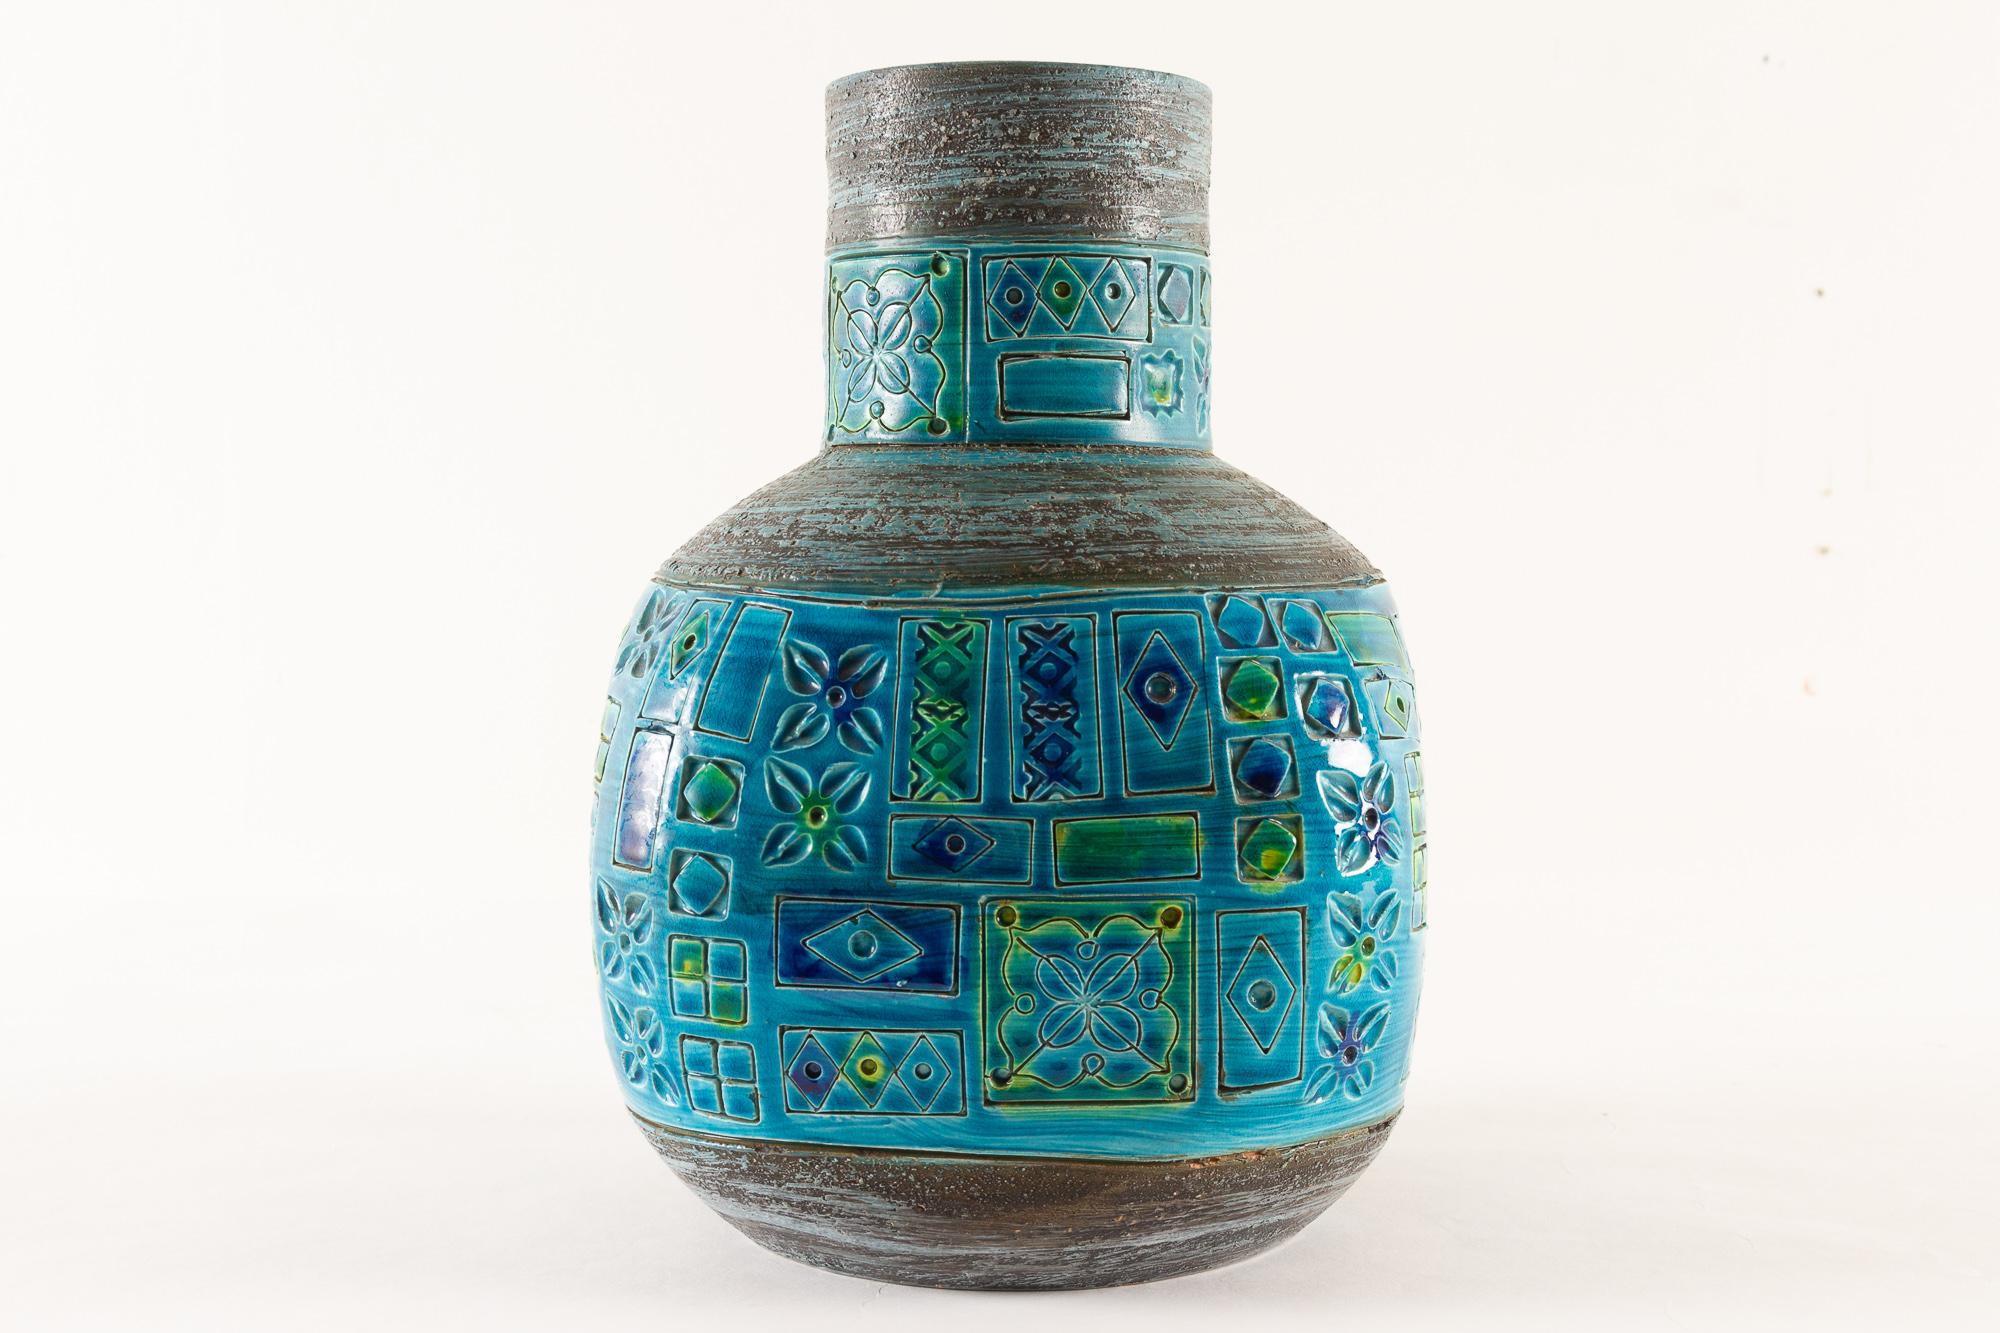 Italian Modern Ceramic vase by Aldo Londi for Bitossi, 1960s
Vintage Italian hand made vase with intricate patterns. Blue, turquoise and green glaze. 
Signed underneath.
Good original condition. Shows some signs of age through minor scuffs and